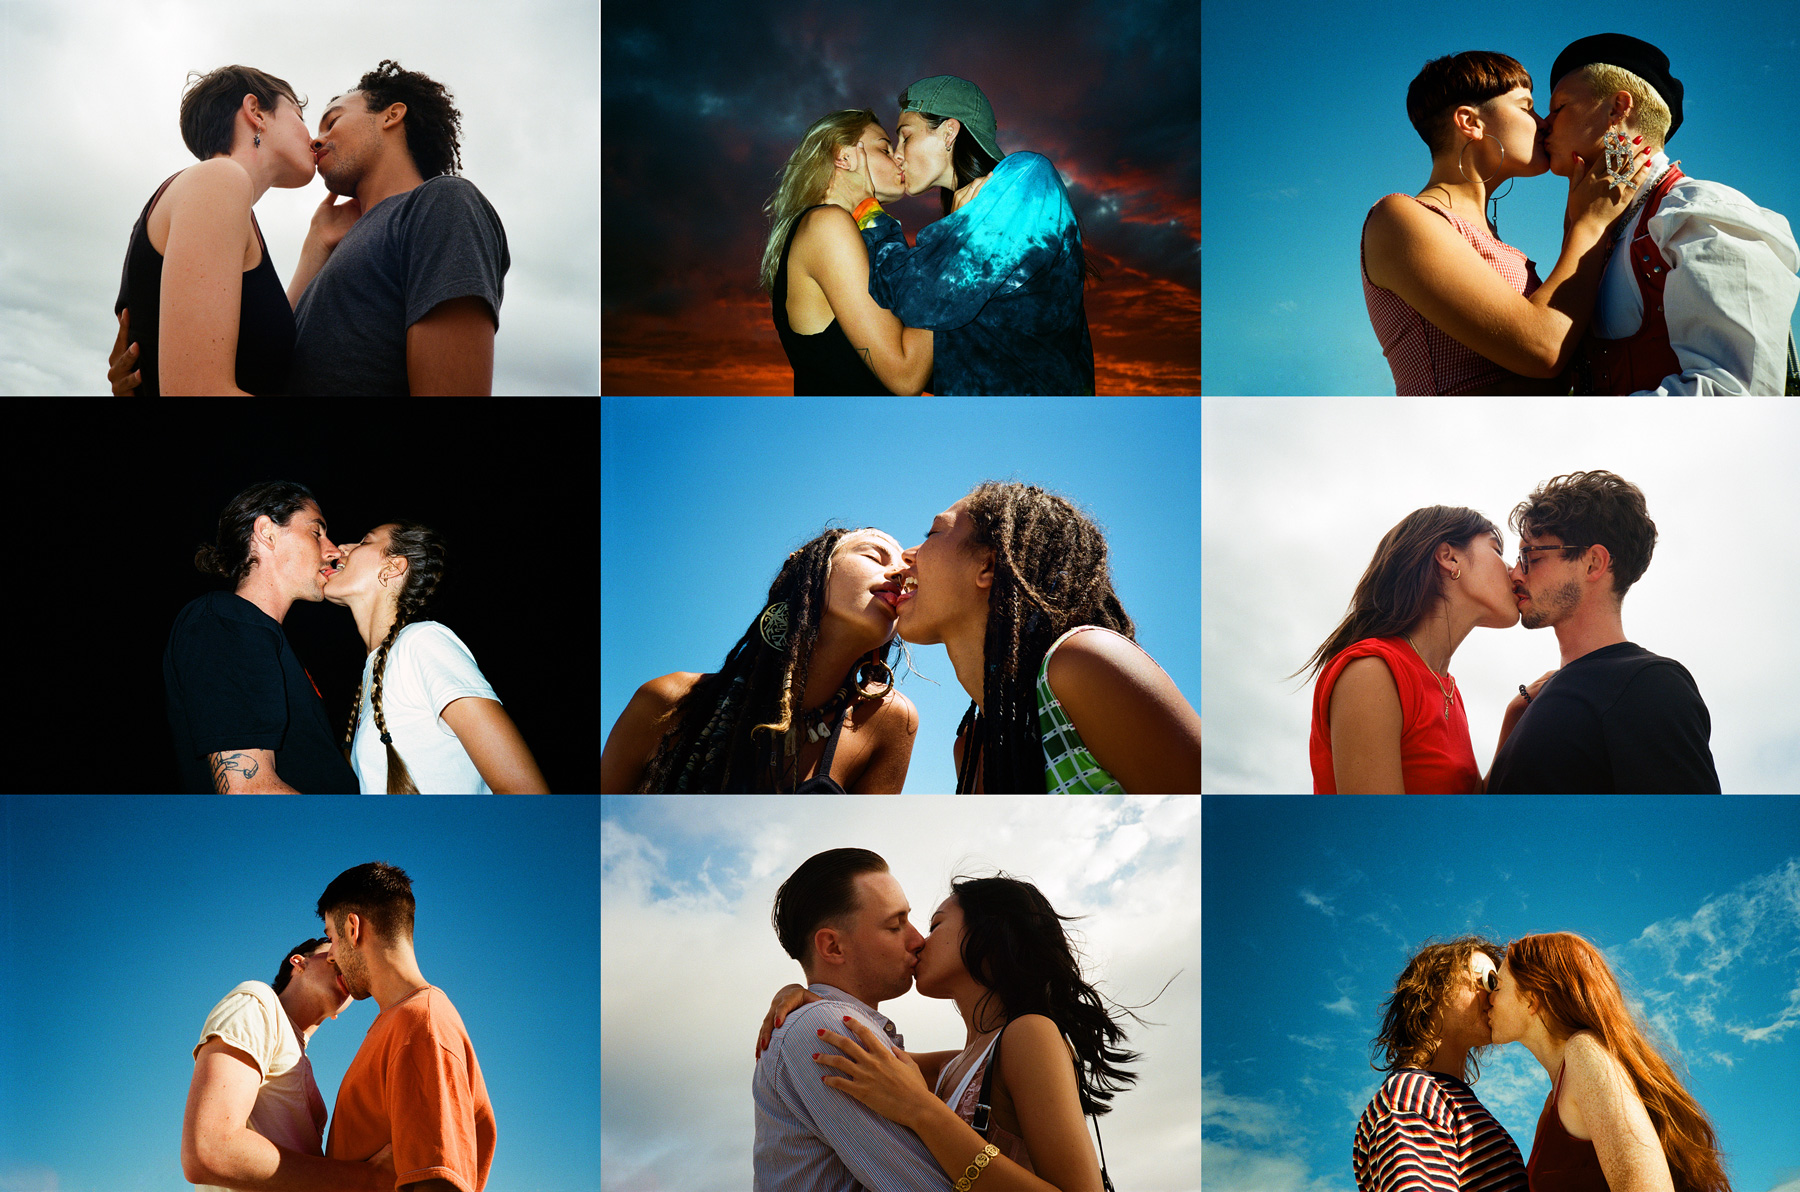 cassie buchan recommends images of people making out pic